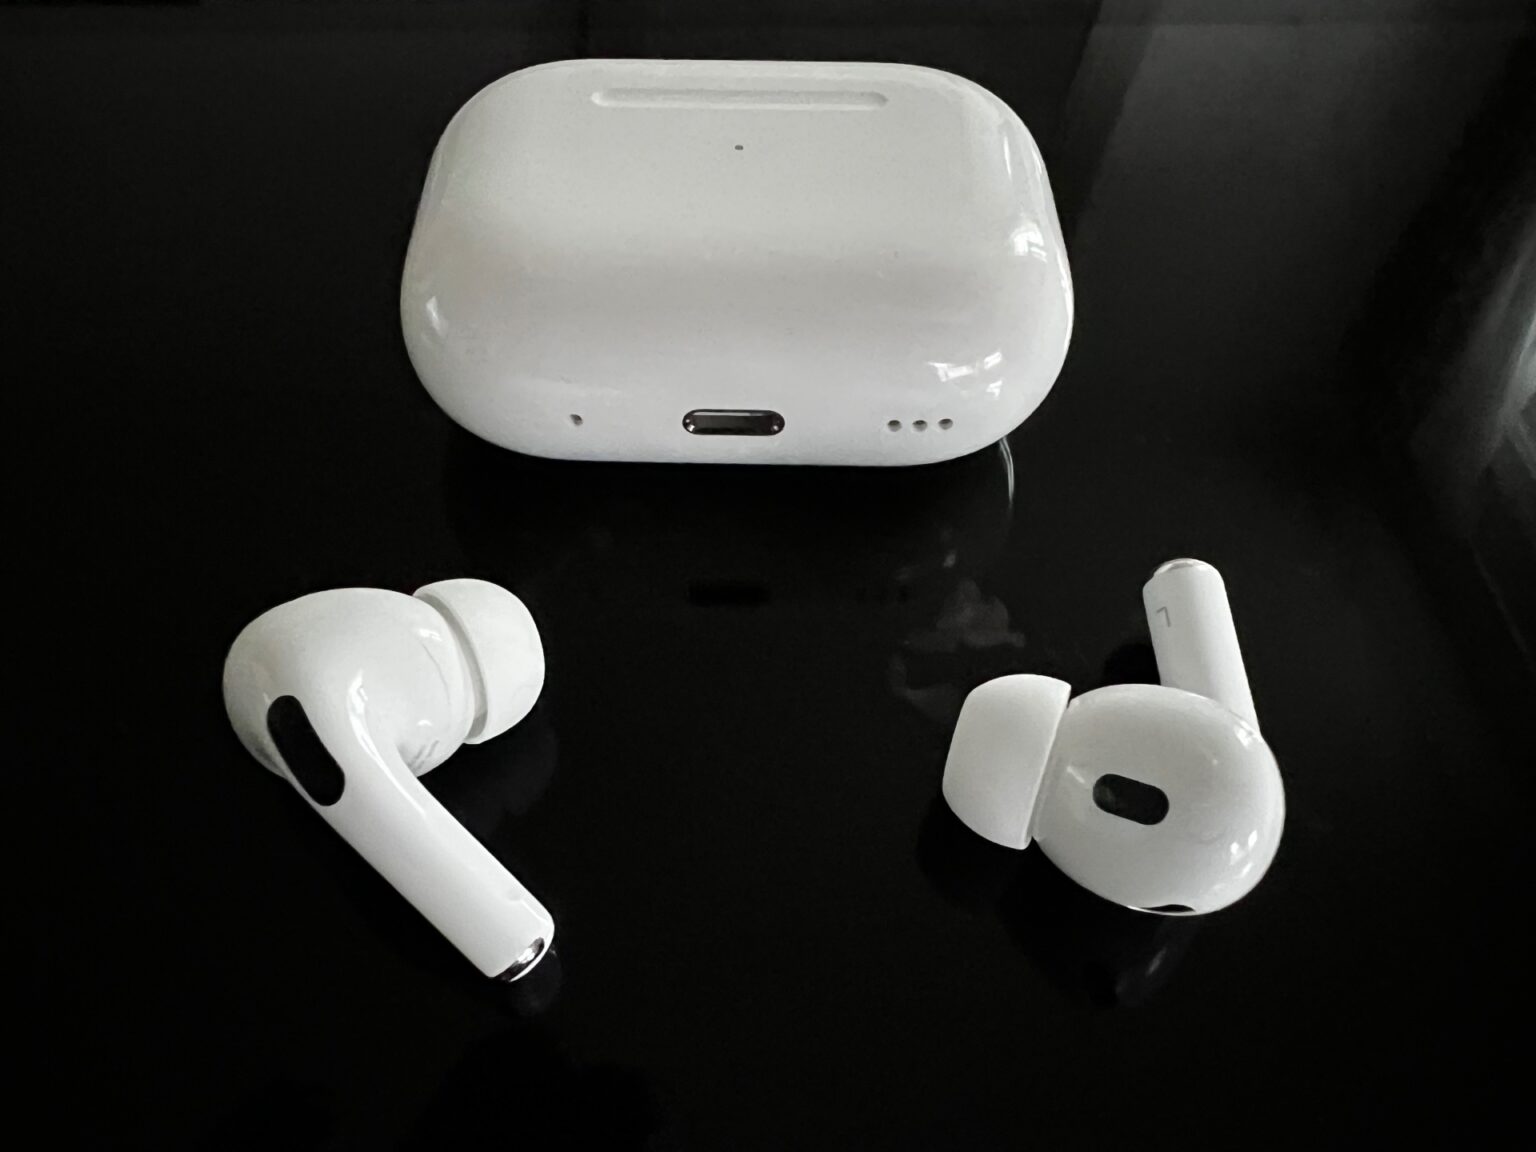 At a glance, they could be AirPods Pro, but they're AirPods Pro 2, with many internal upgrades.